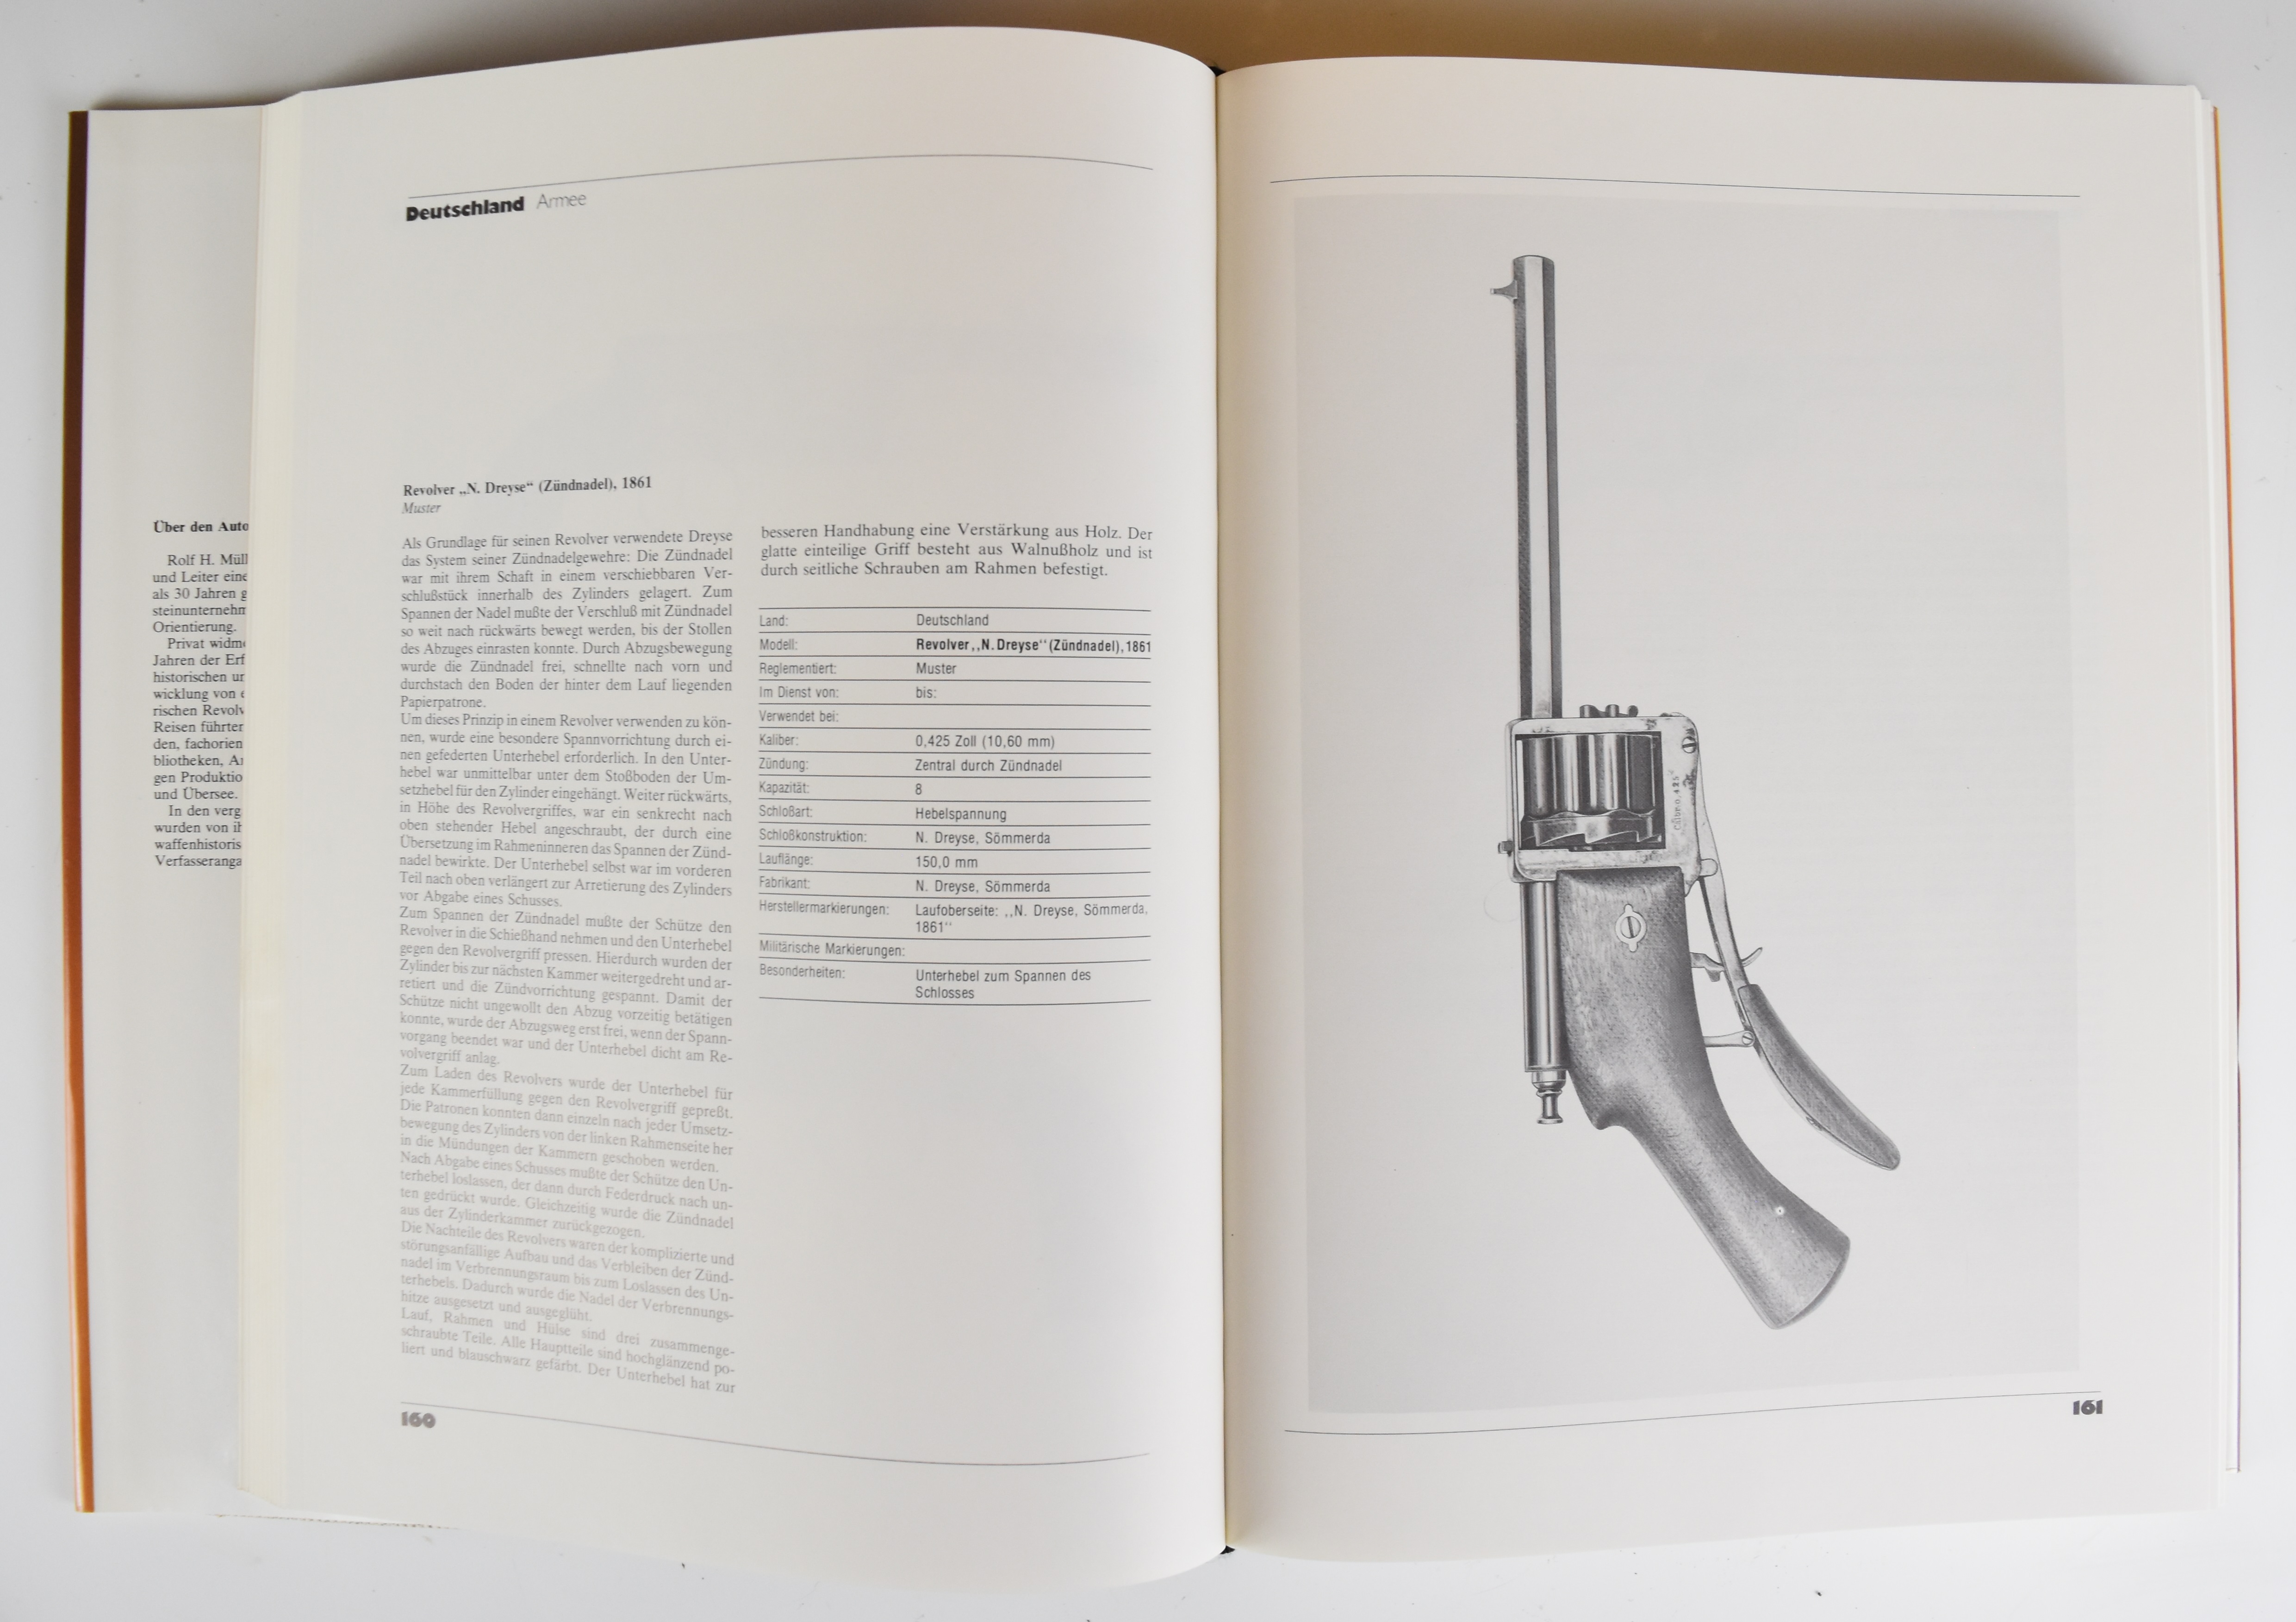 [Shooting] History and Technology of European Military Revolvers by Rolf H Muller, Volumes 1 and 2 - Image 2 of 4